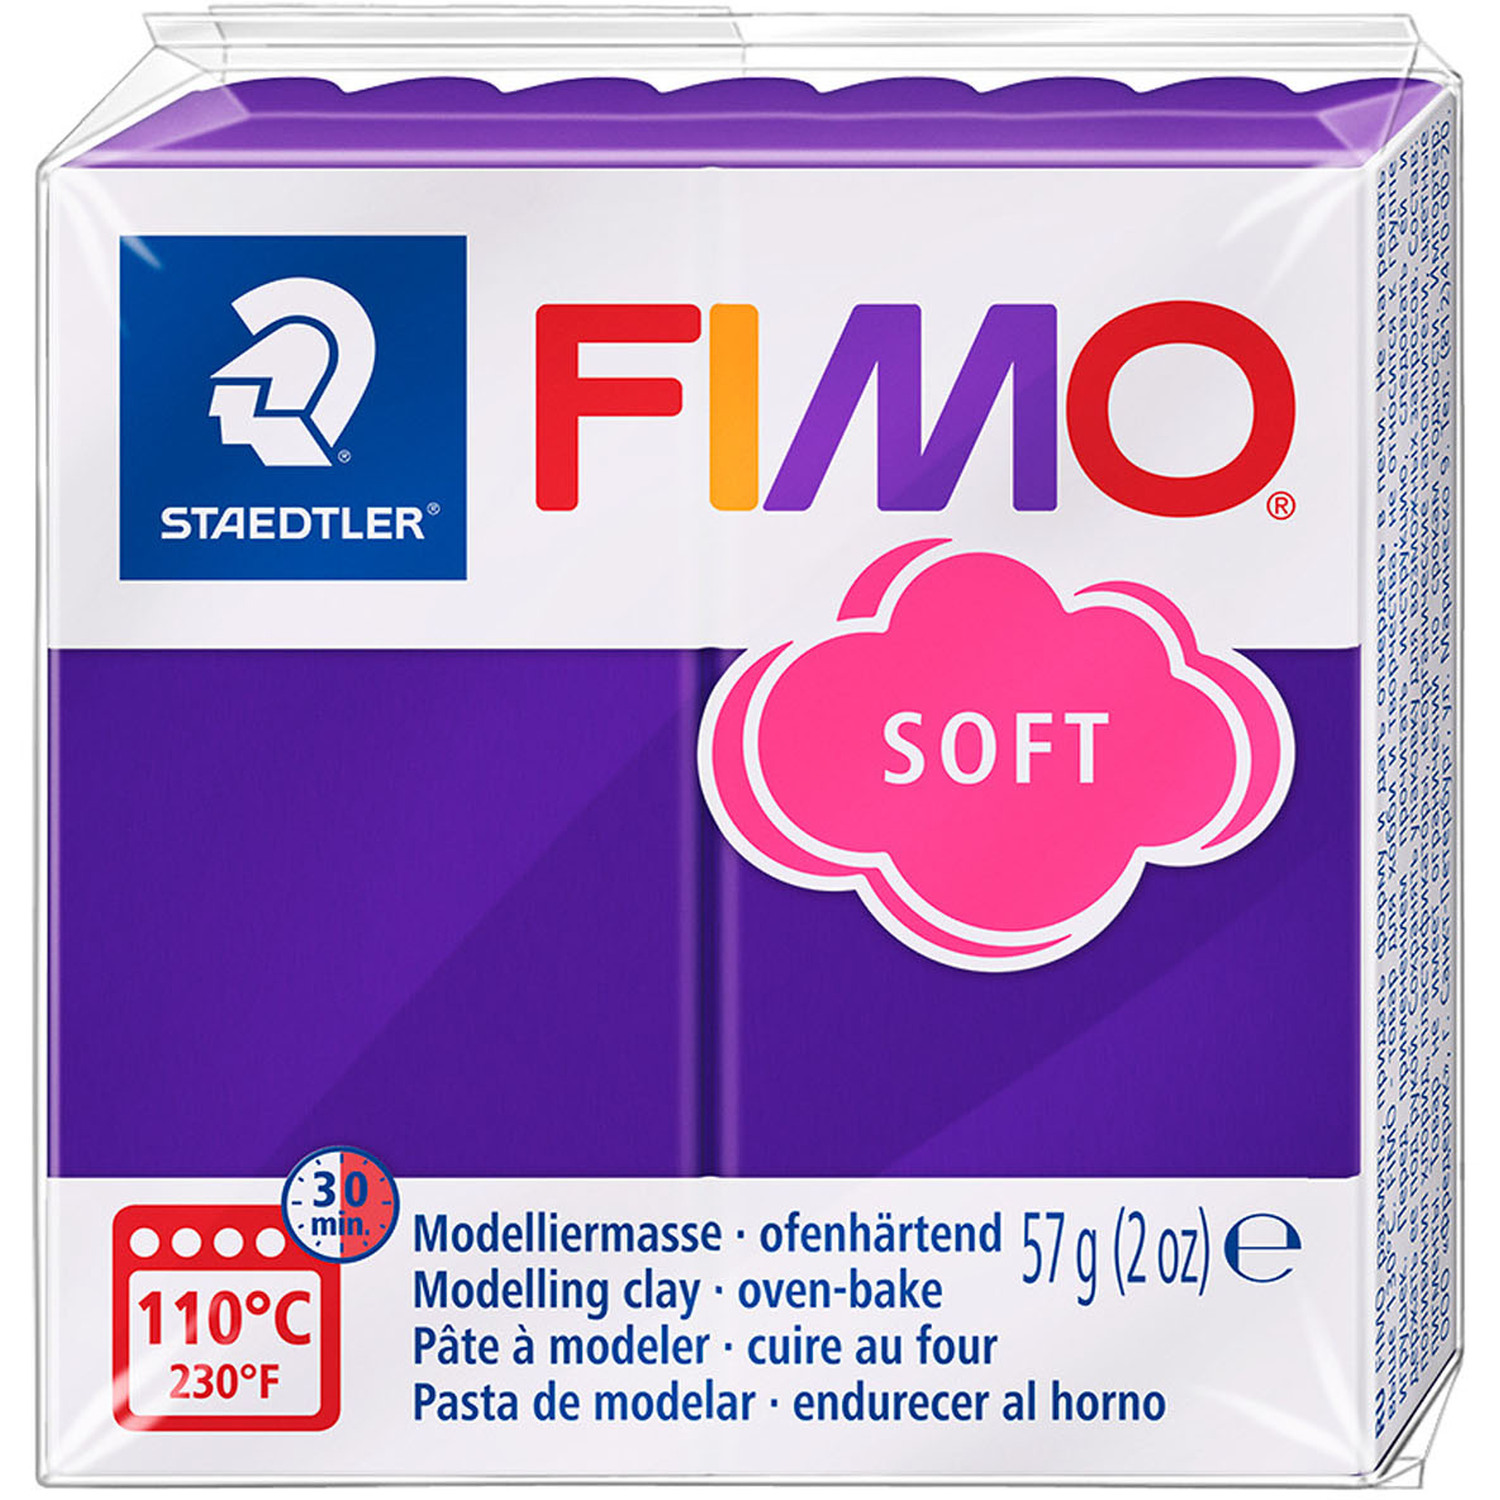 Staedtler FIMO Soft Modelling Clay Block - Plum Image 1